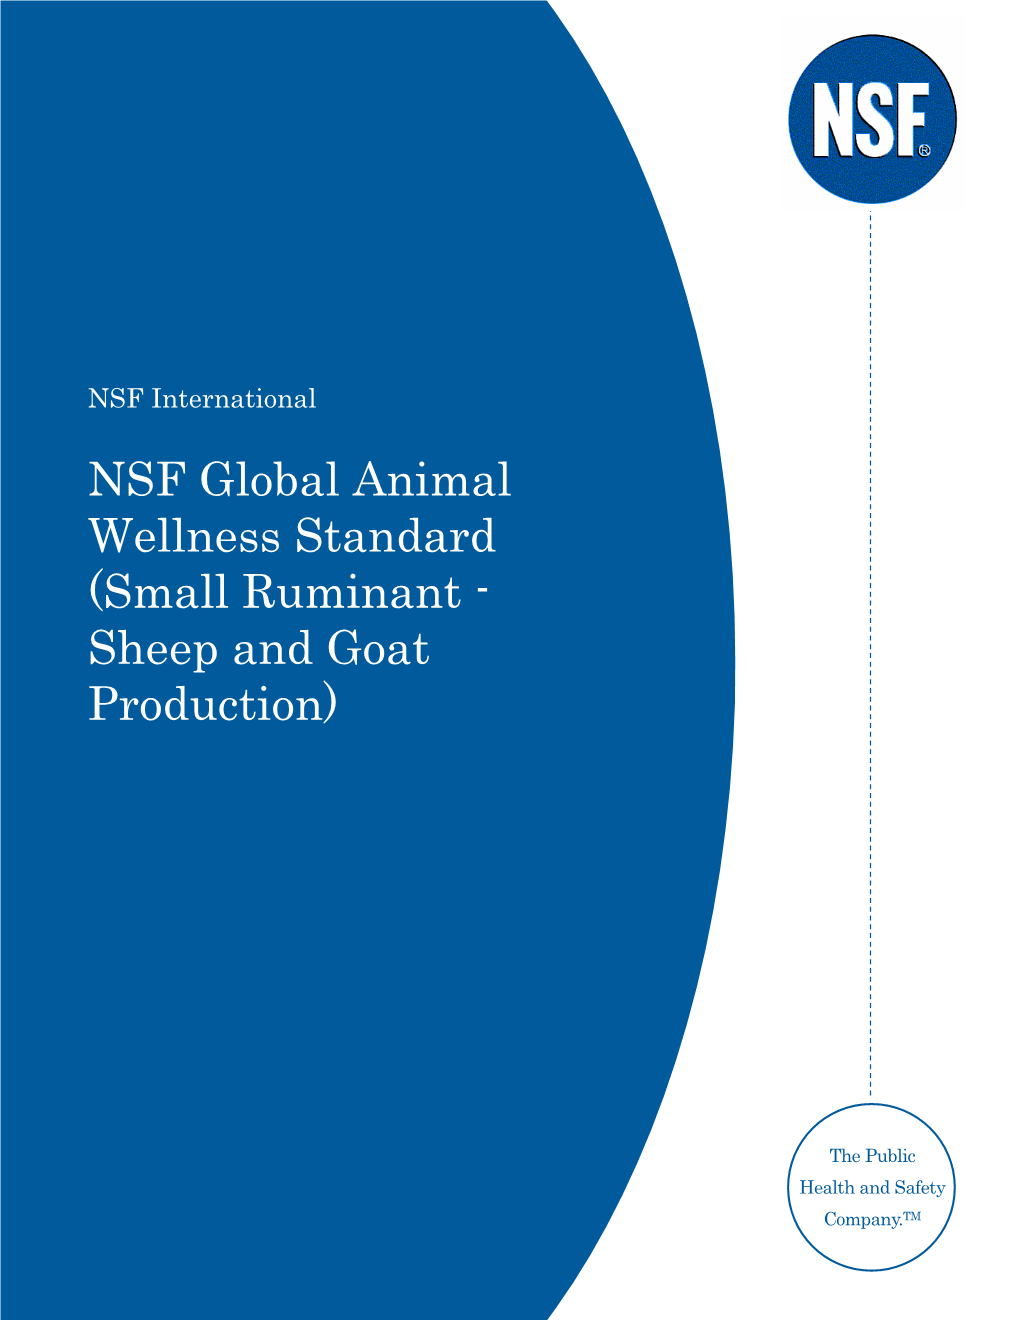 NSF Global Animal Wellness Standards Are Designed to Be Relevant in Every Country, Region and Market